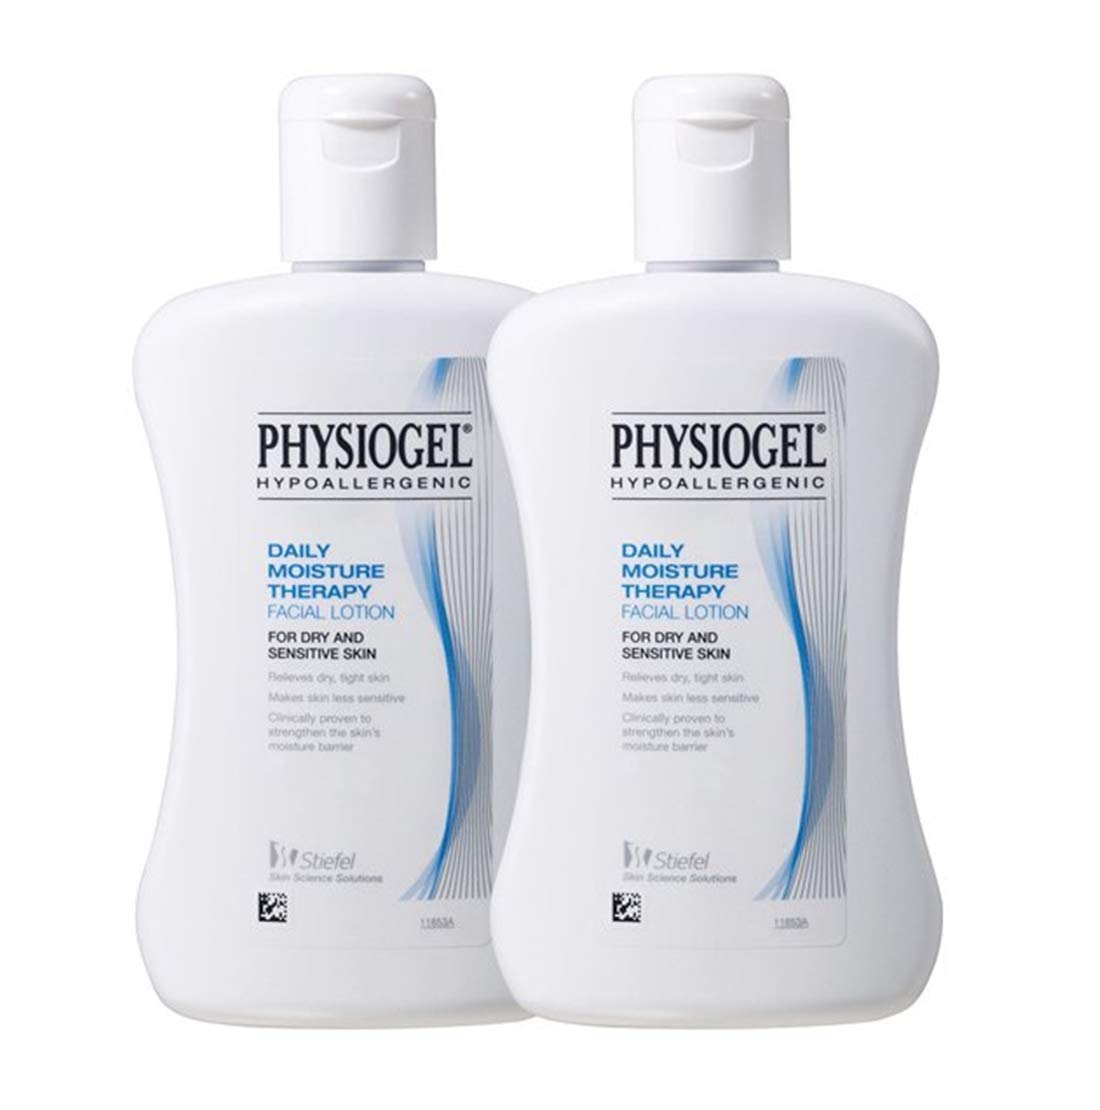 Physiogel Hypoallergenic Daily Moisture Therapy Facial LOTION 6.76 Fl Oz (200ml) x 2 Pack set